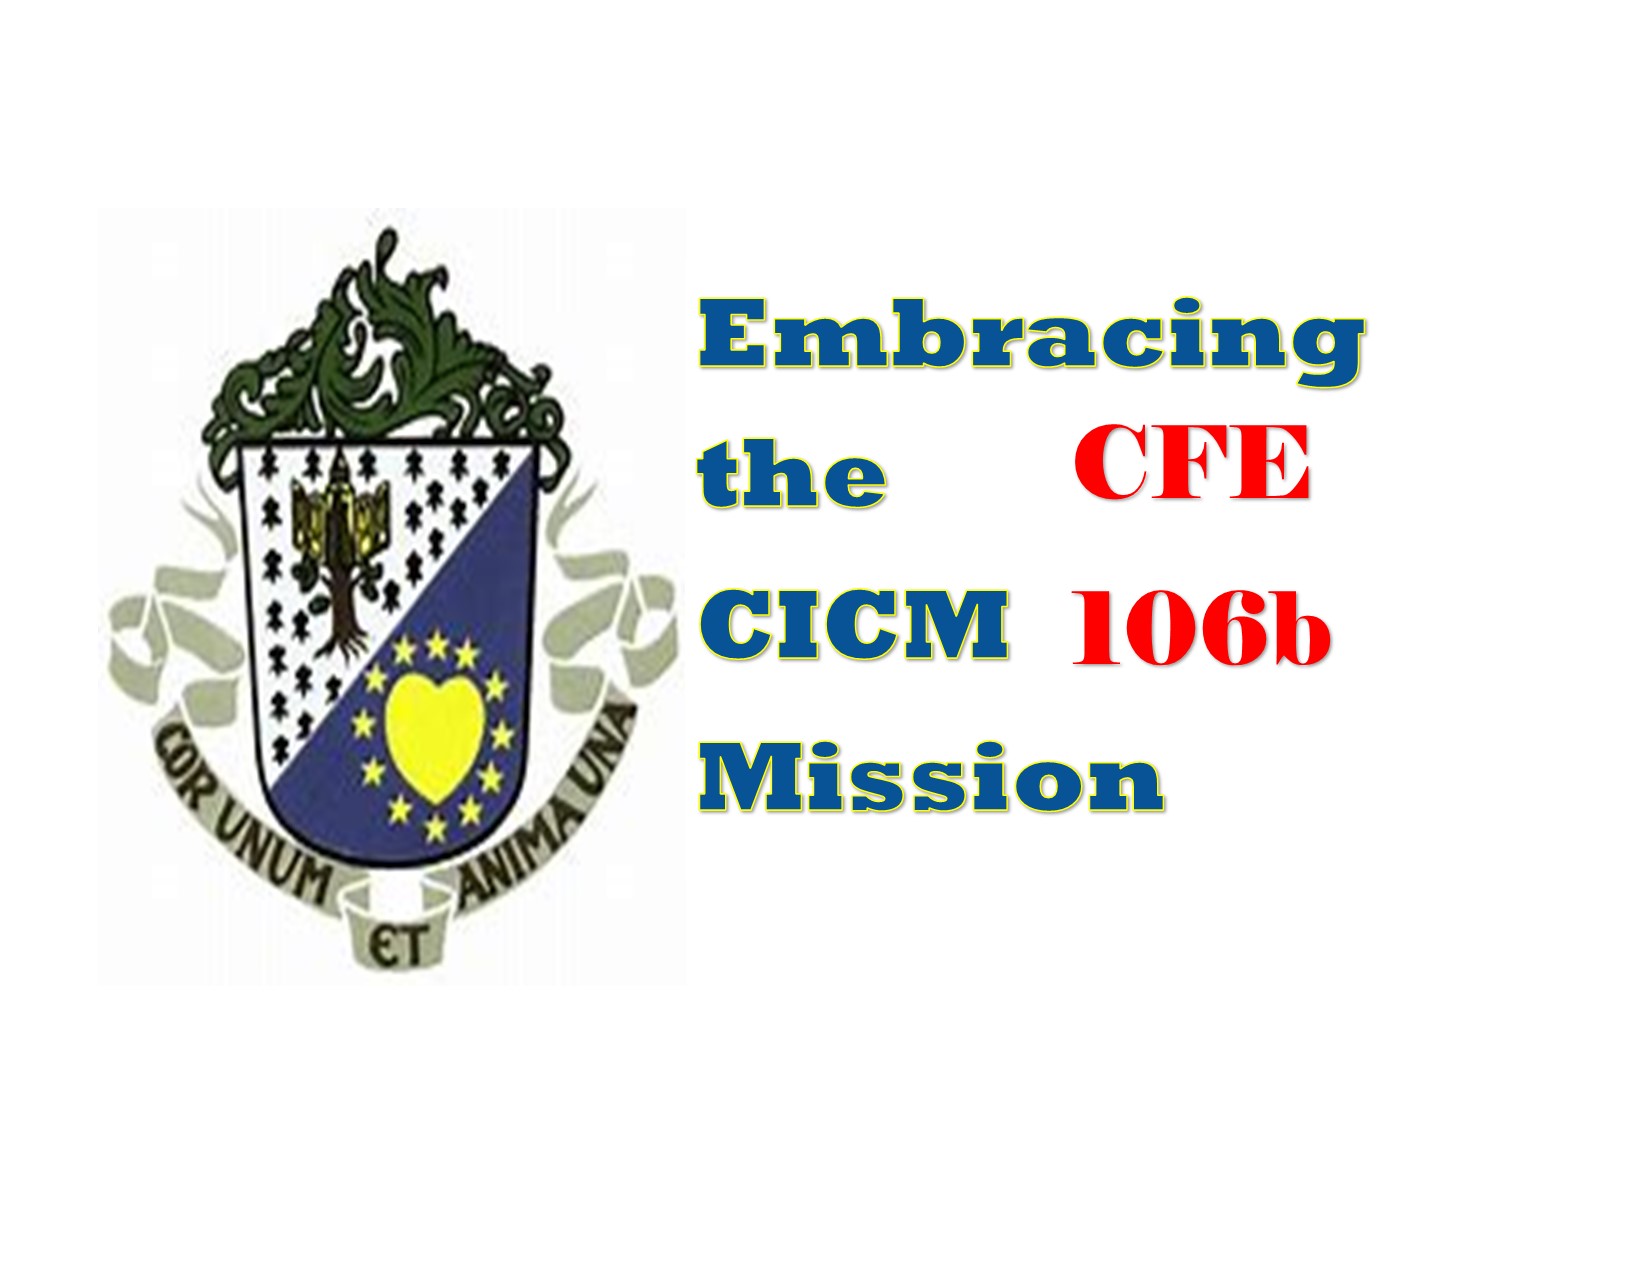 CFE 106b [4129] Embracing the CICM Mission